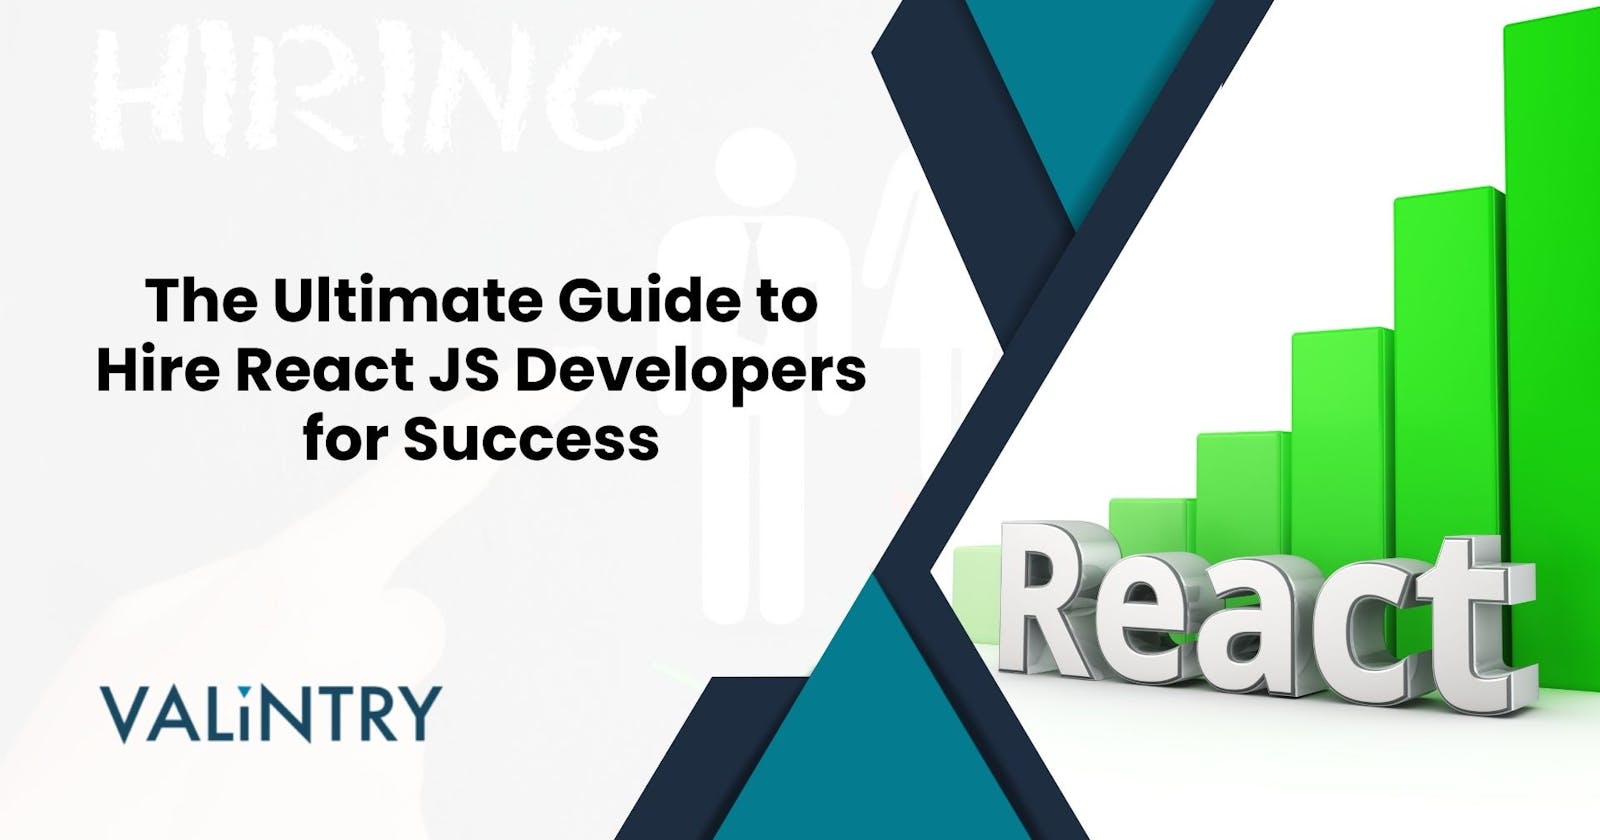 The Ultimate Guide to Hire React JS Developers for Success - VALiNTRY